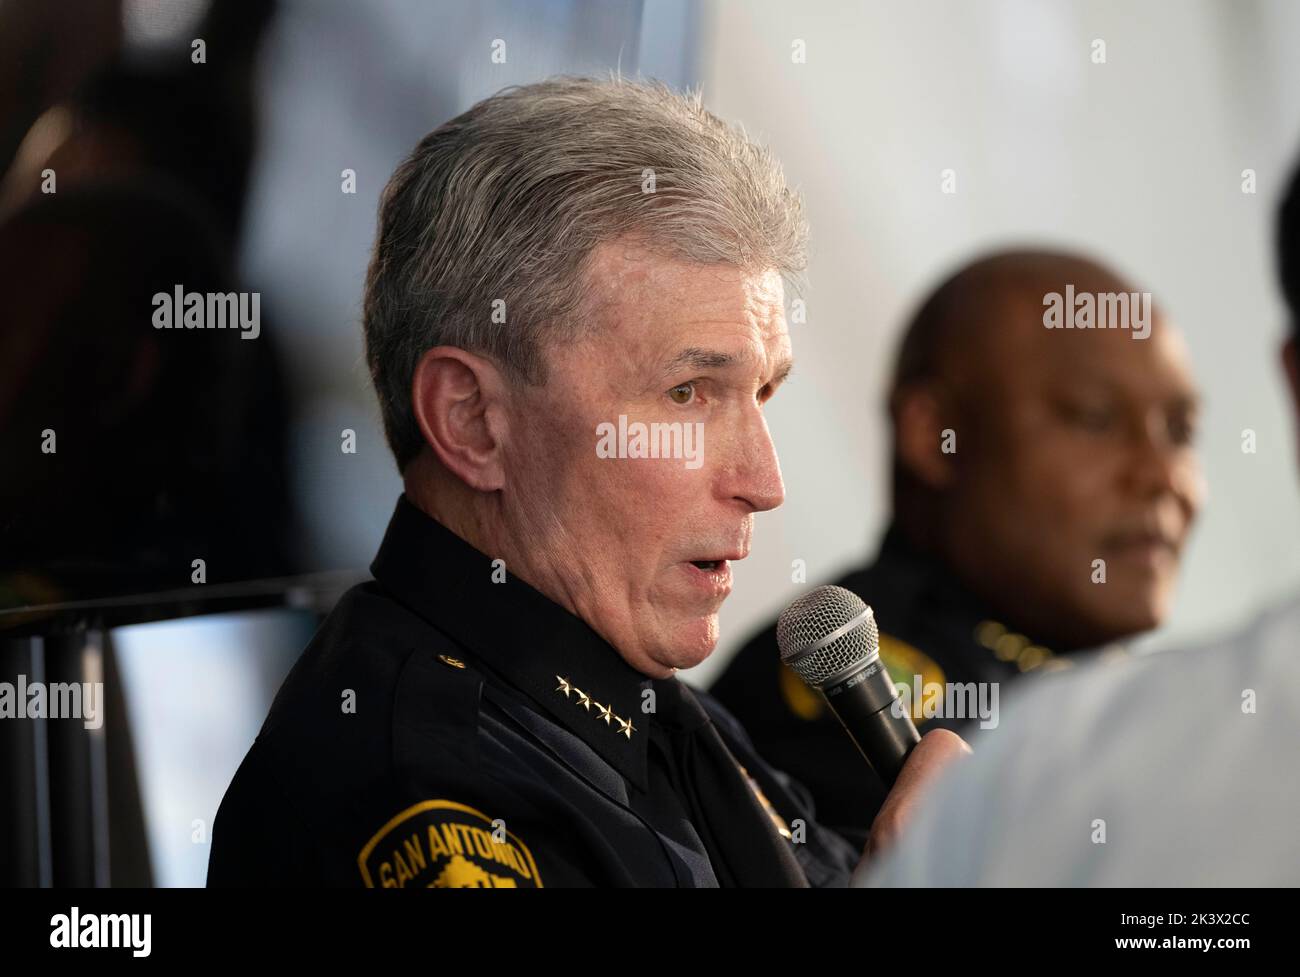 San Antonio police chief WILLIAM MCMANUS tells about problems with policing during an interview session at the annual Texas Tribune Festival in downtown Austin on September 24, 2022. Stock Photo